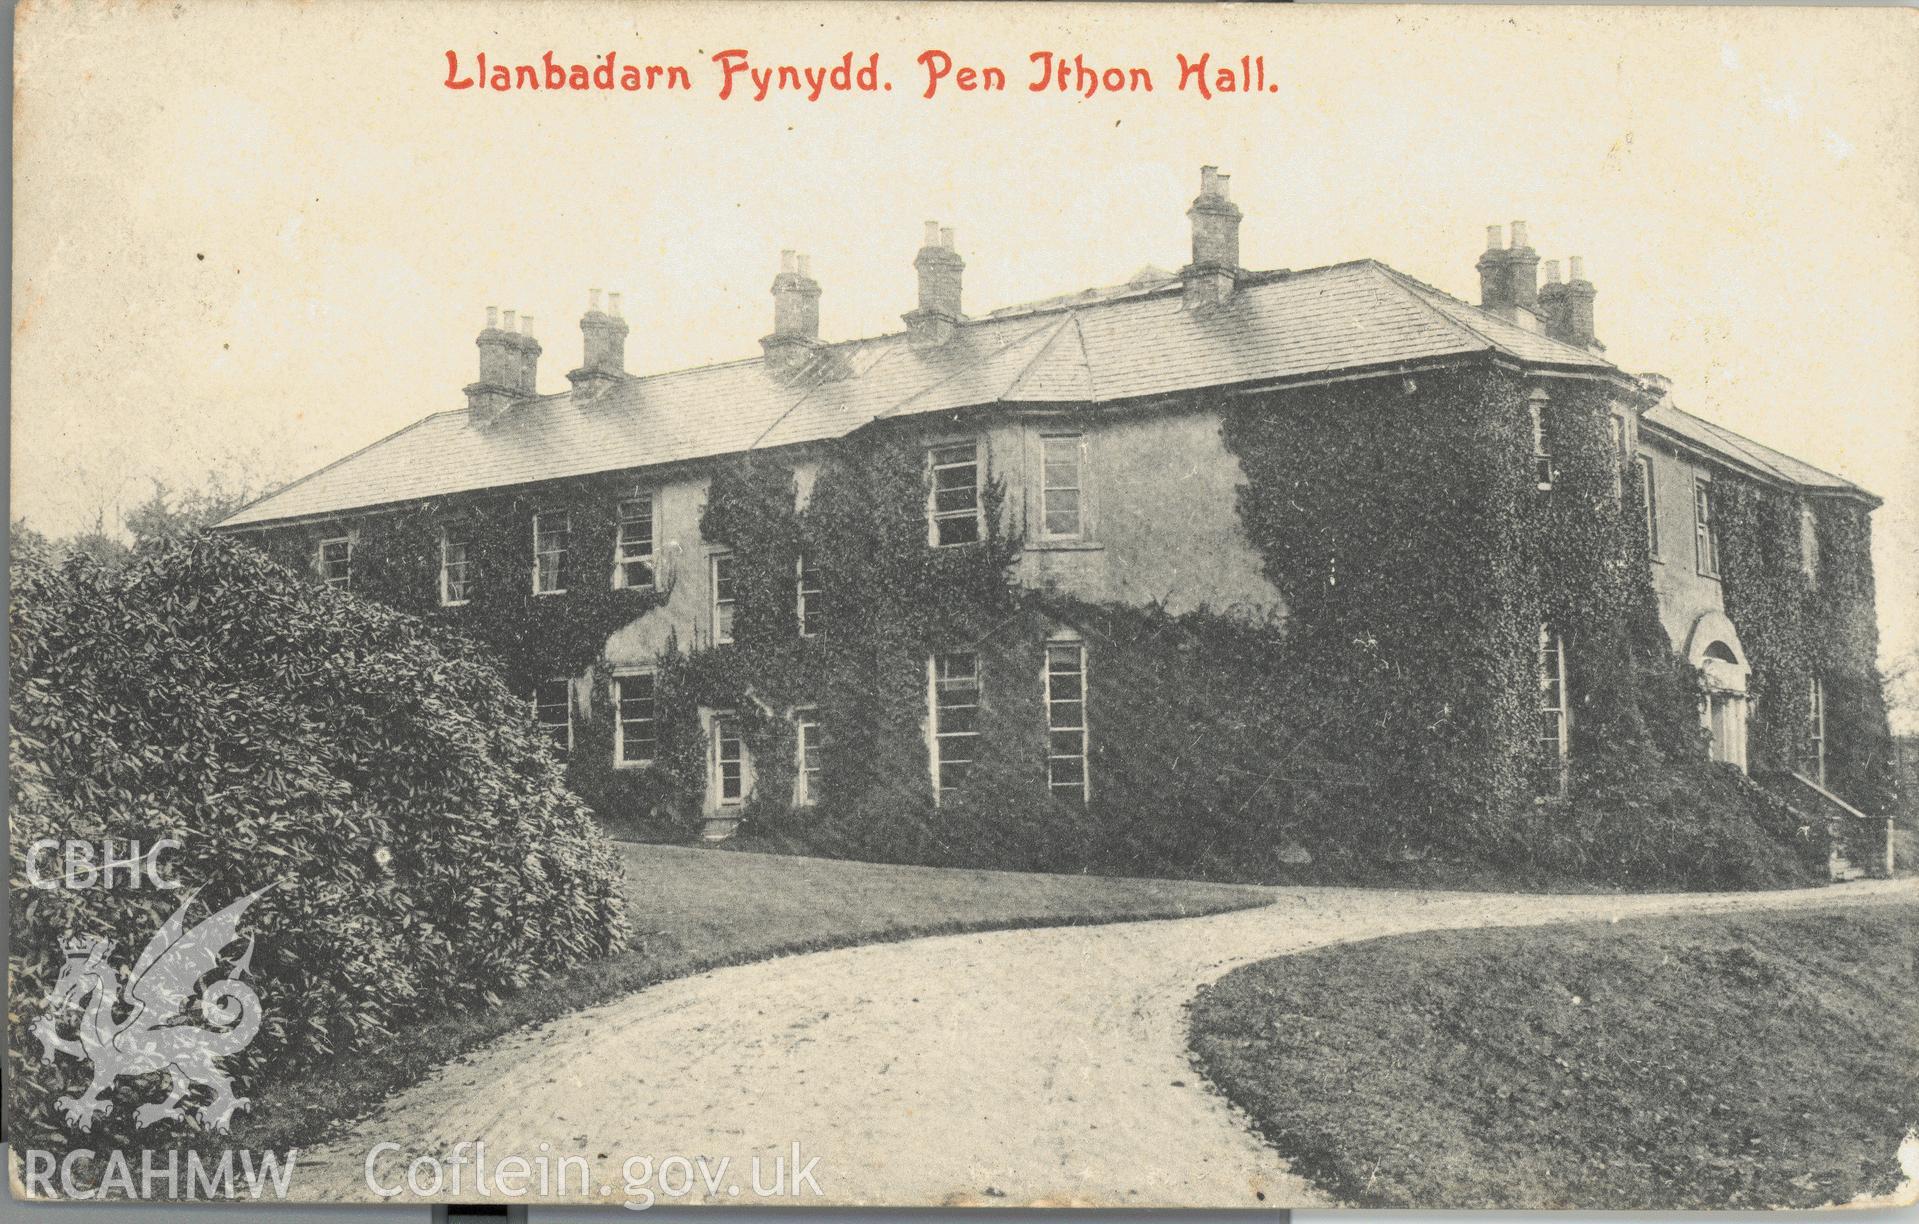 Digitised postcard image of Penithon hall, Park & Son, Newtown. Produced by Parks and Gardens Data Services, from an original item in the Peter Davis Collection at Parks and Gardens UK. We hold only web-resolution images of this collection, suitable for viewing on screen and for research purposes only. We do not hold the original images, or publication quality scans.